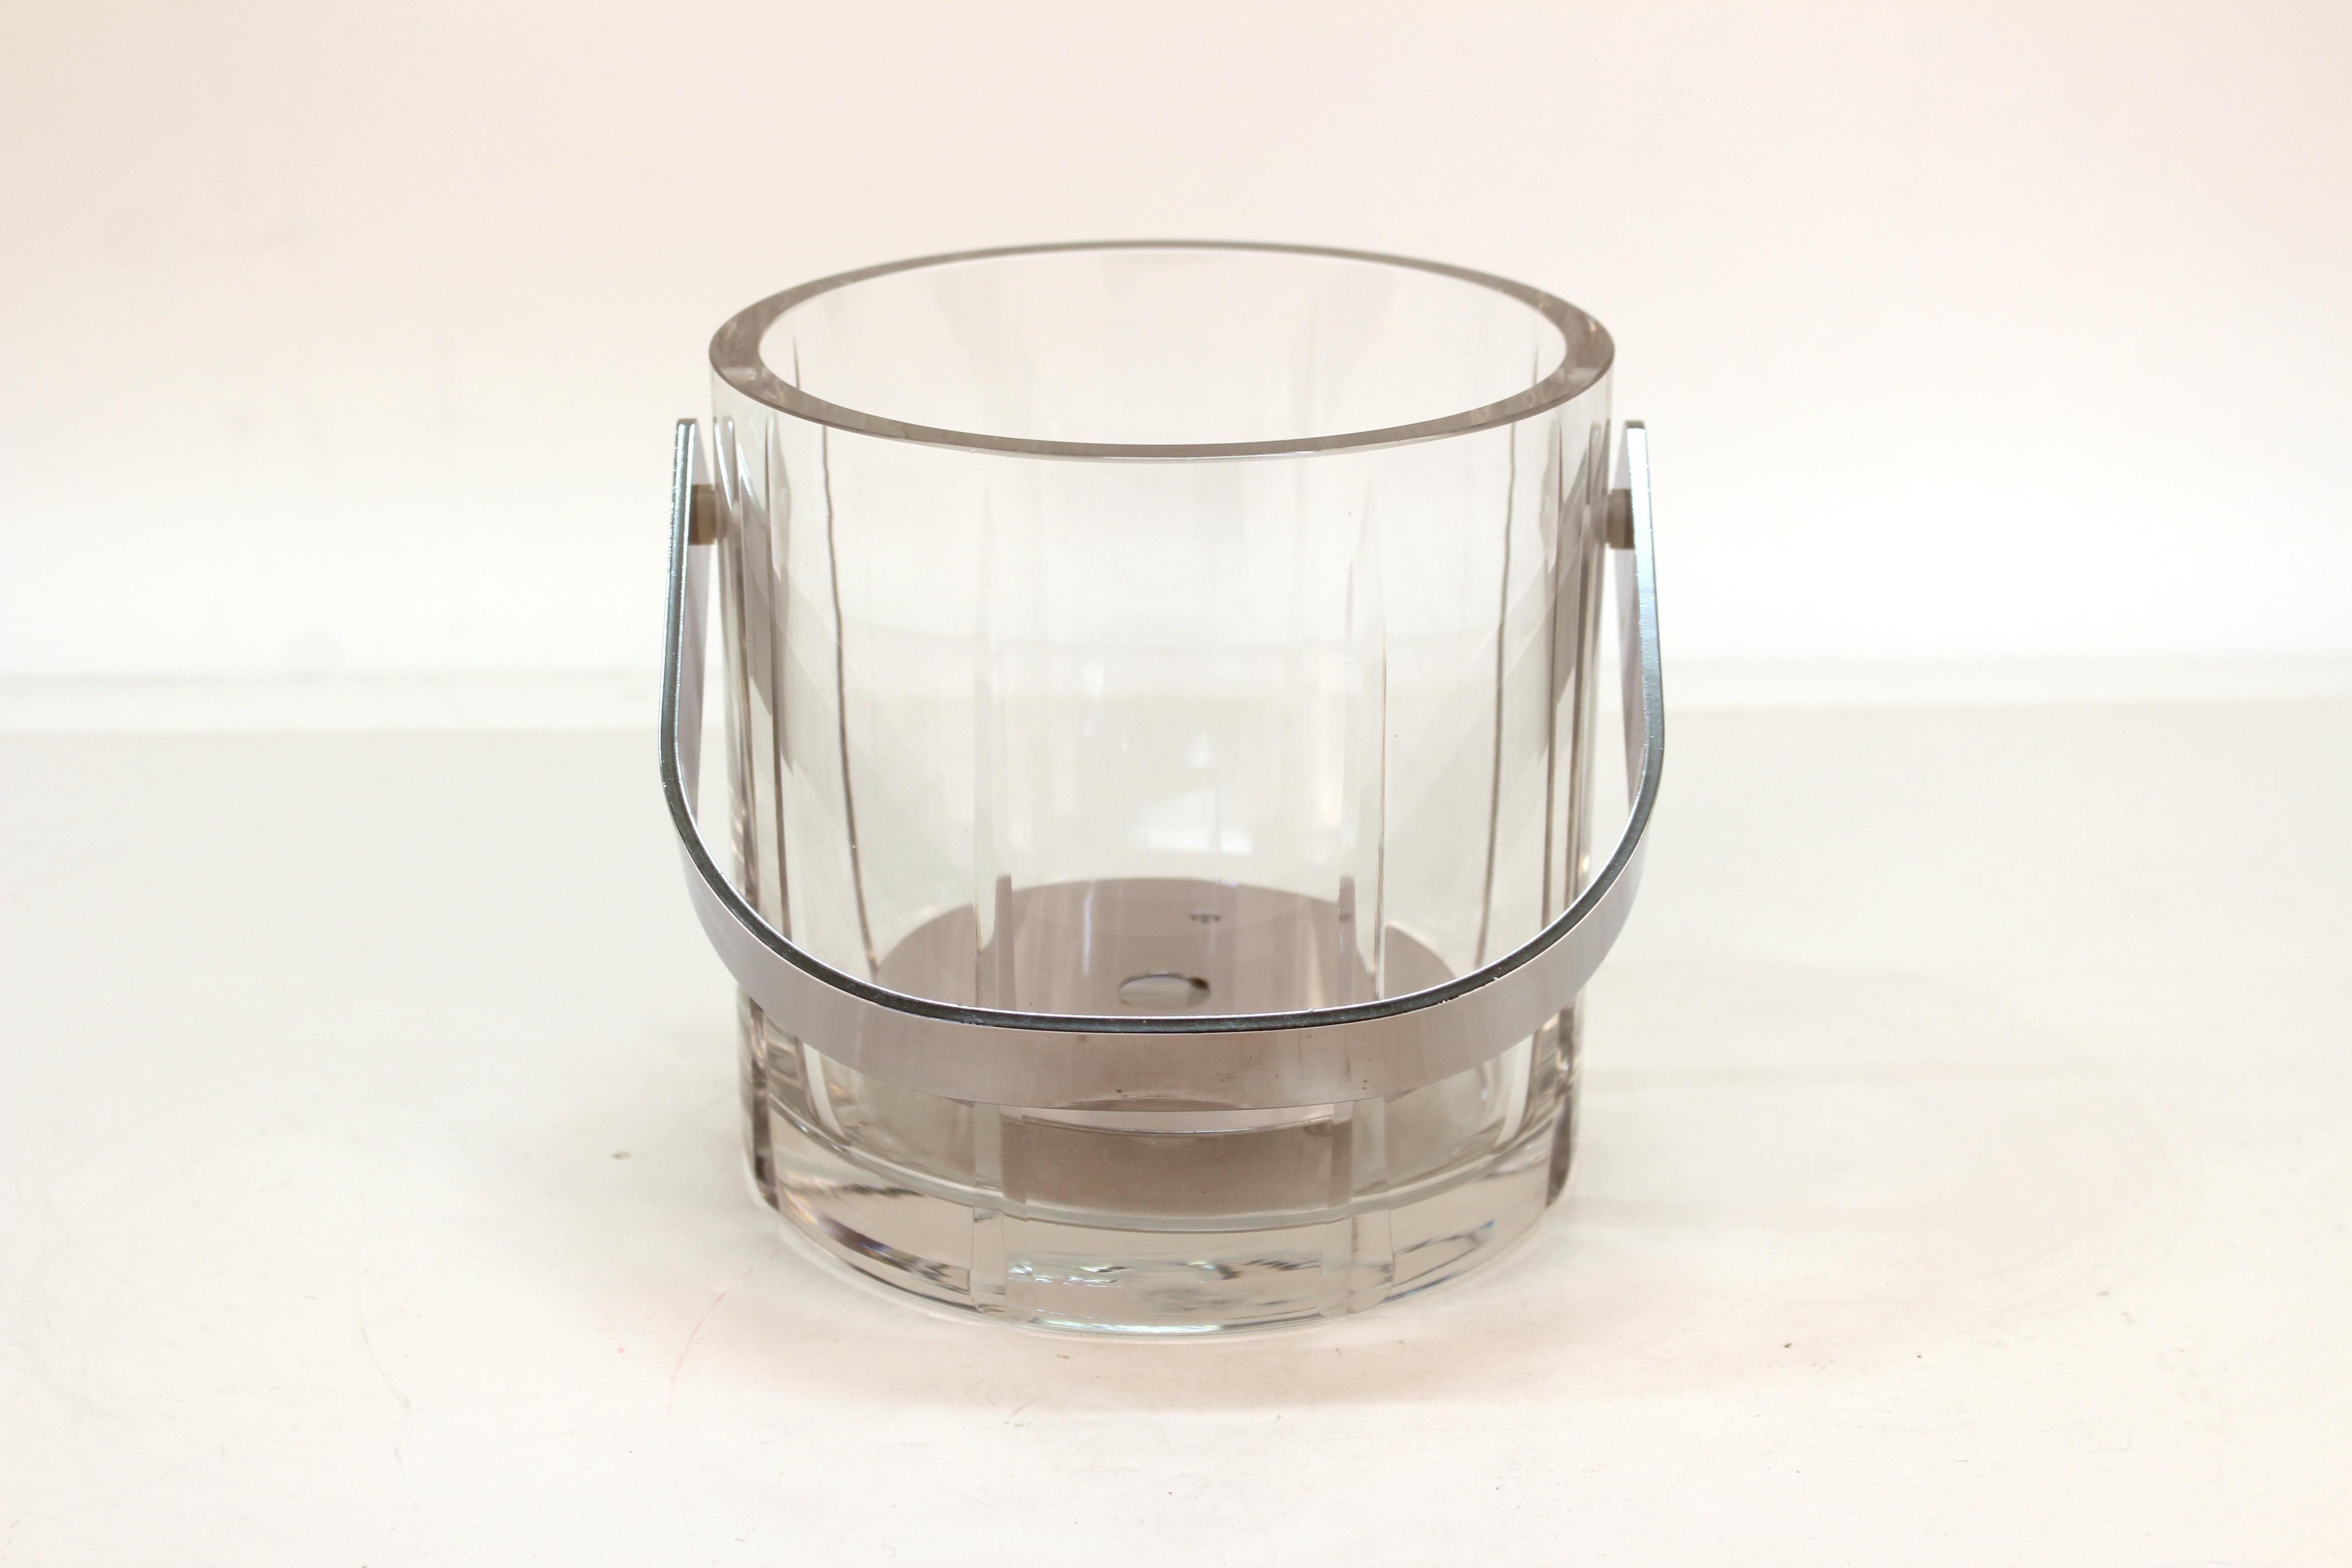 Mid-Century Modern ice bucket in glass, with a chrome handle and chrome inlay. The piece is in good vintage condition.